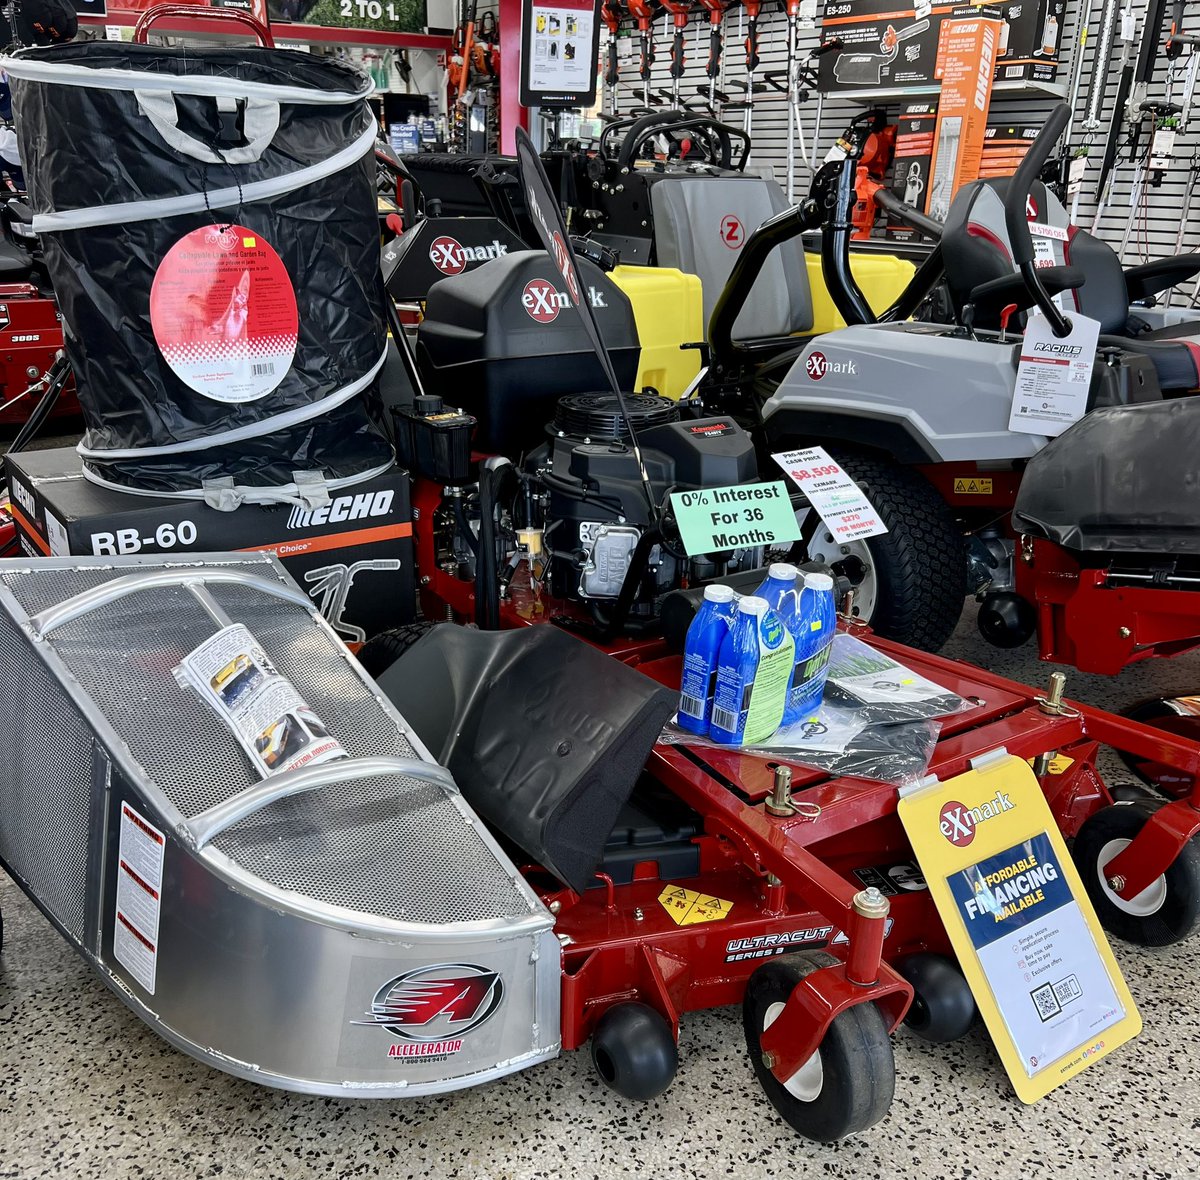 Get ready for leaf cleanup with the Exmark Turf Tracer walk behind and the Accelerator bagger. Ready to work!

#exmarkmowers #exmark